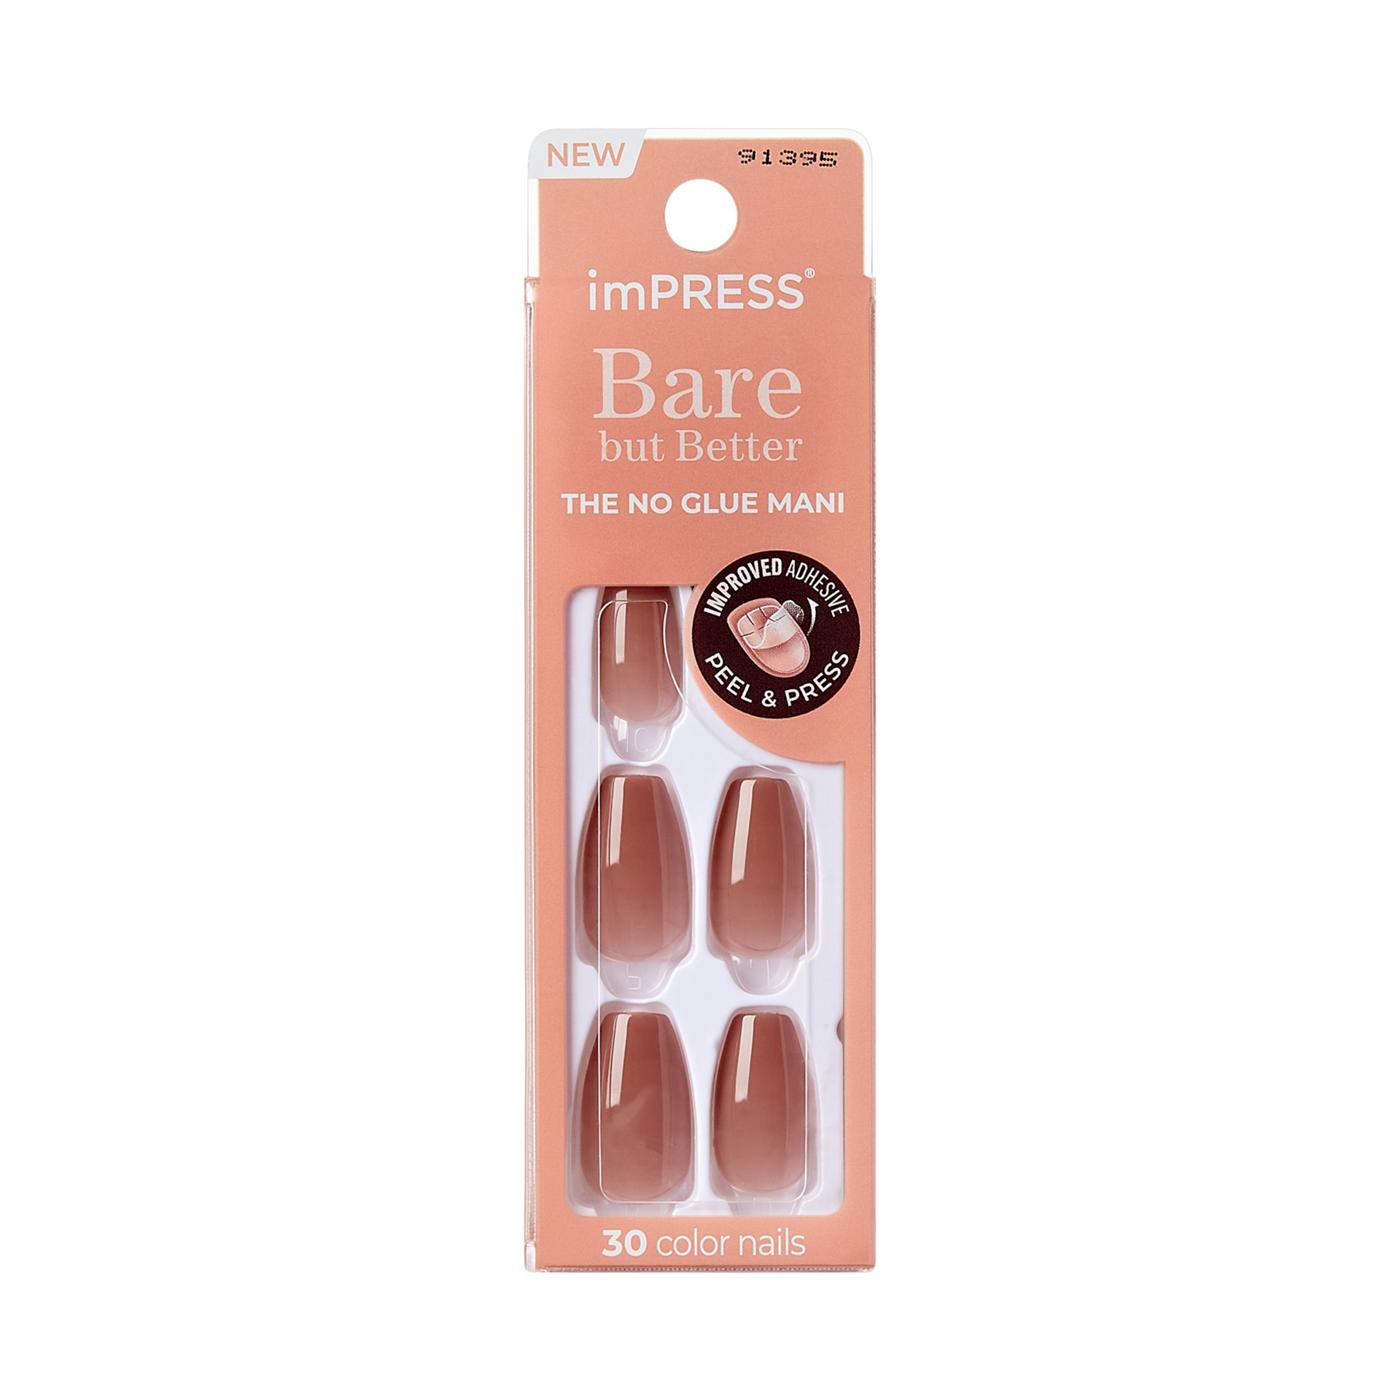 KISS imPRESS Bare But Better Manicure - Flare; image 1 of 6